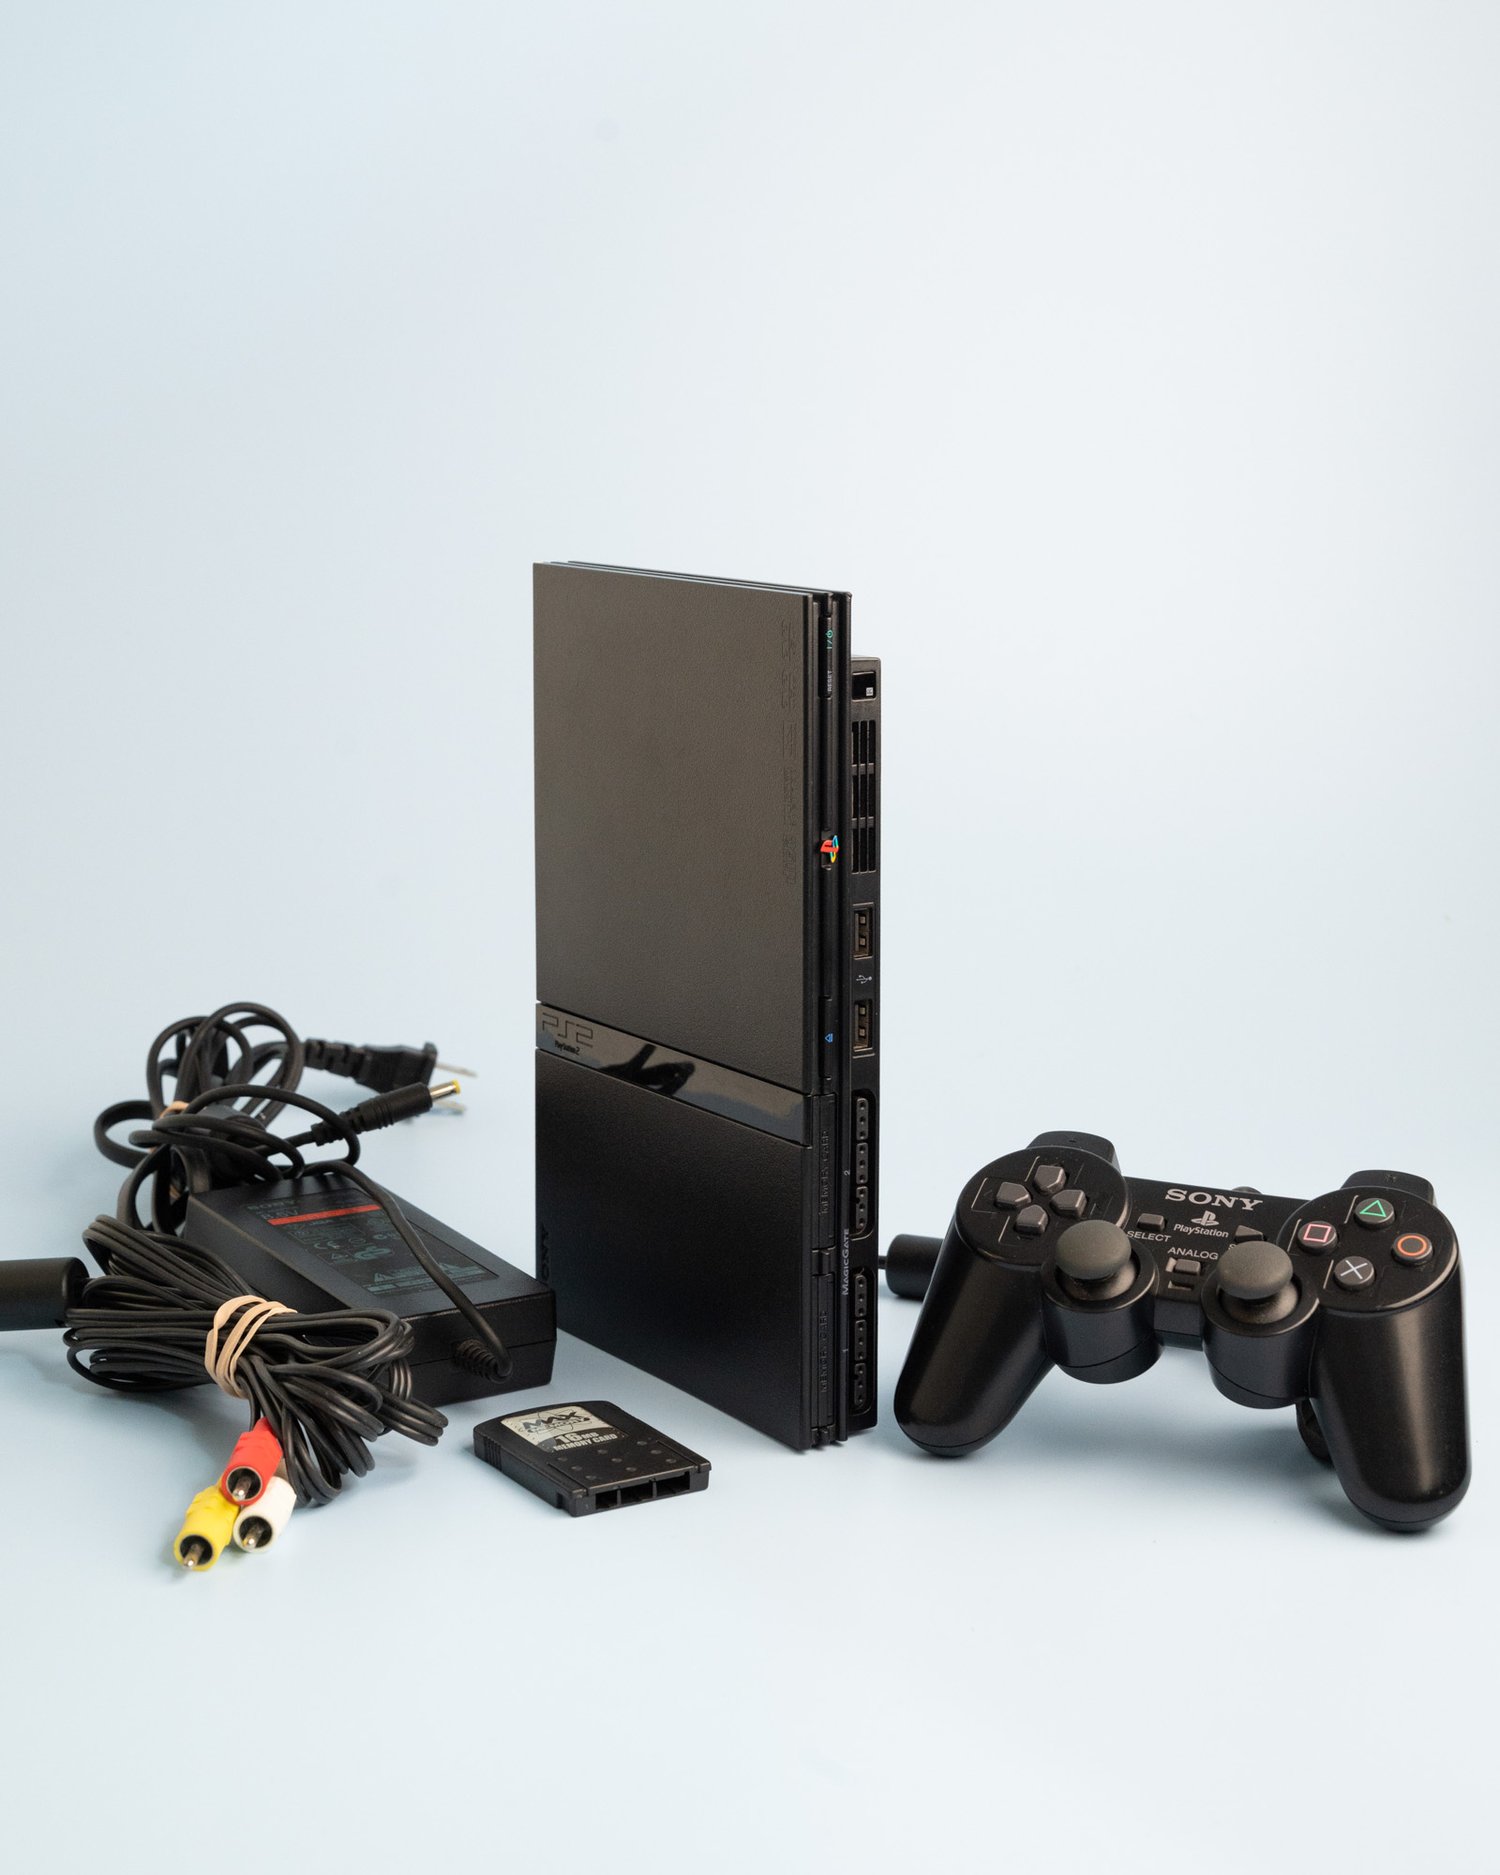 Sony PlayStation 2 Slim Overview - Consolevariations